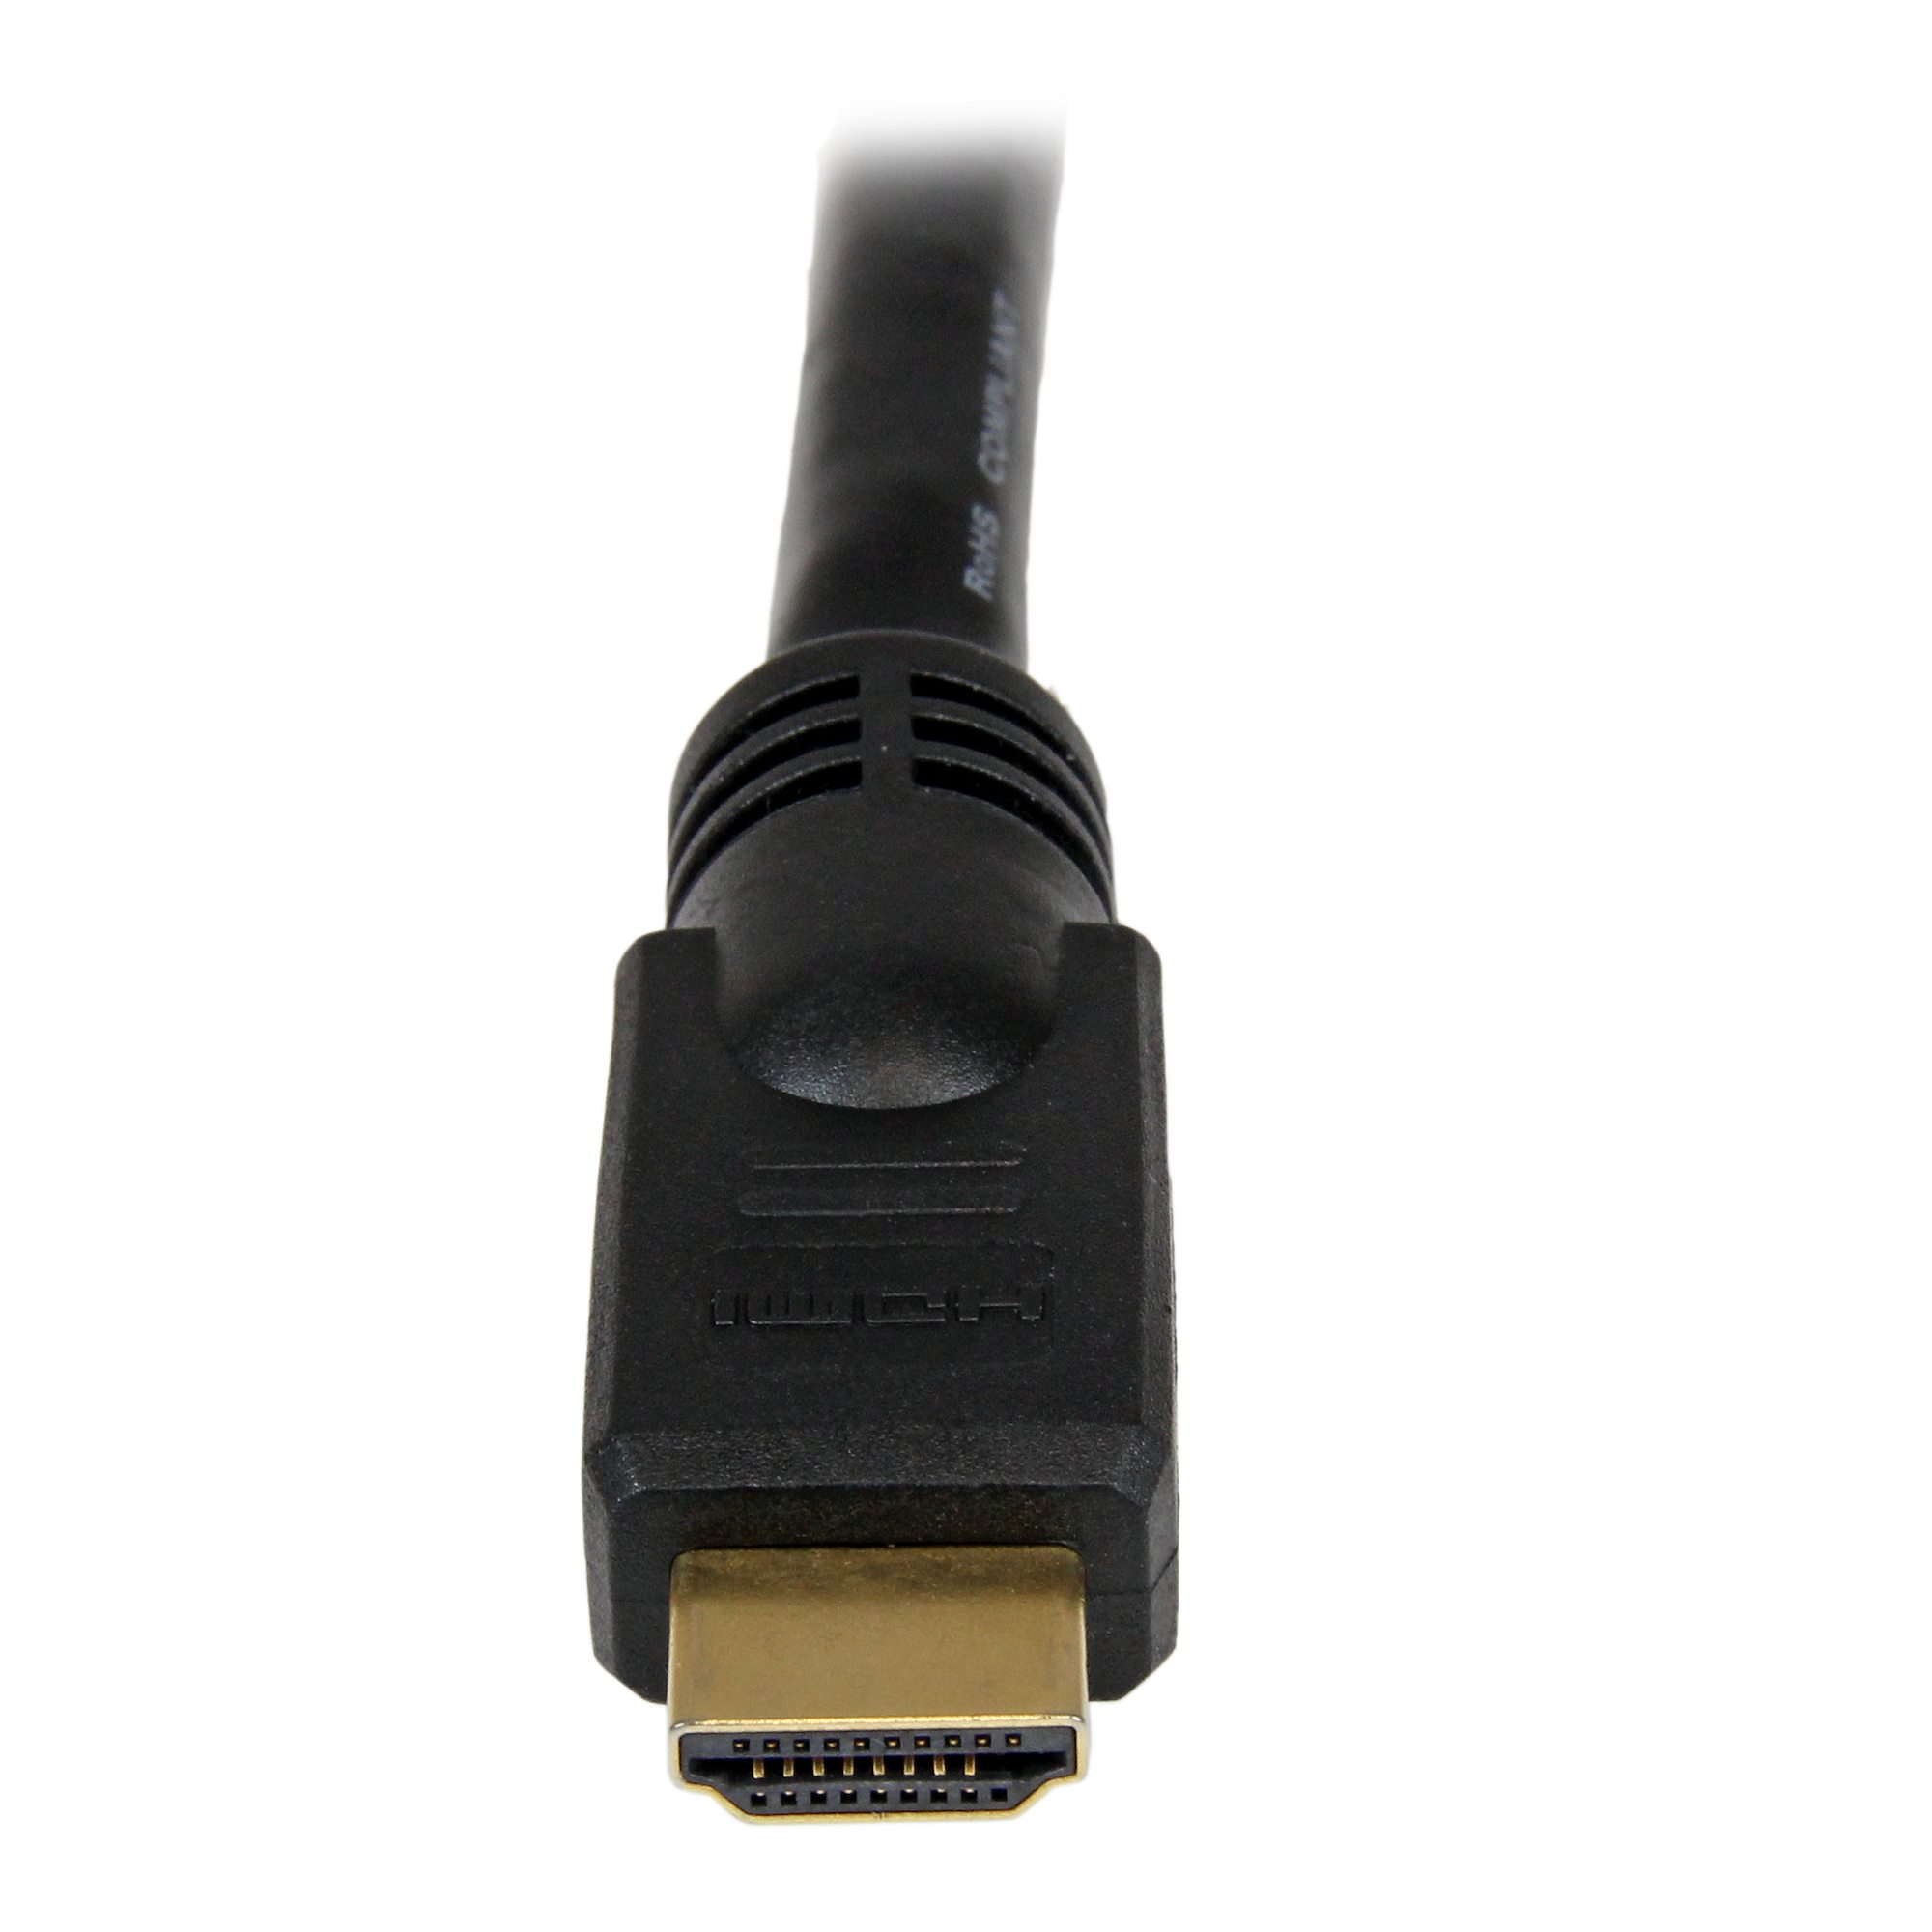 New Kit-25ft Gold HighSpeed HDMI Cable+Display Port to HDMI MF Converter Coupler 